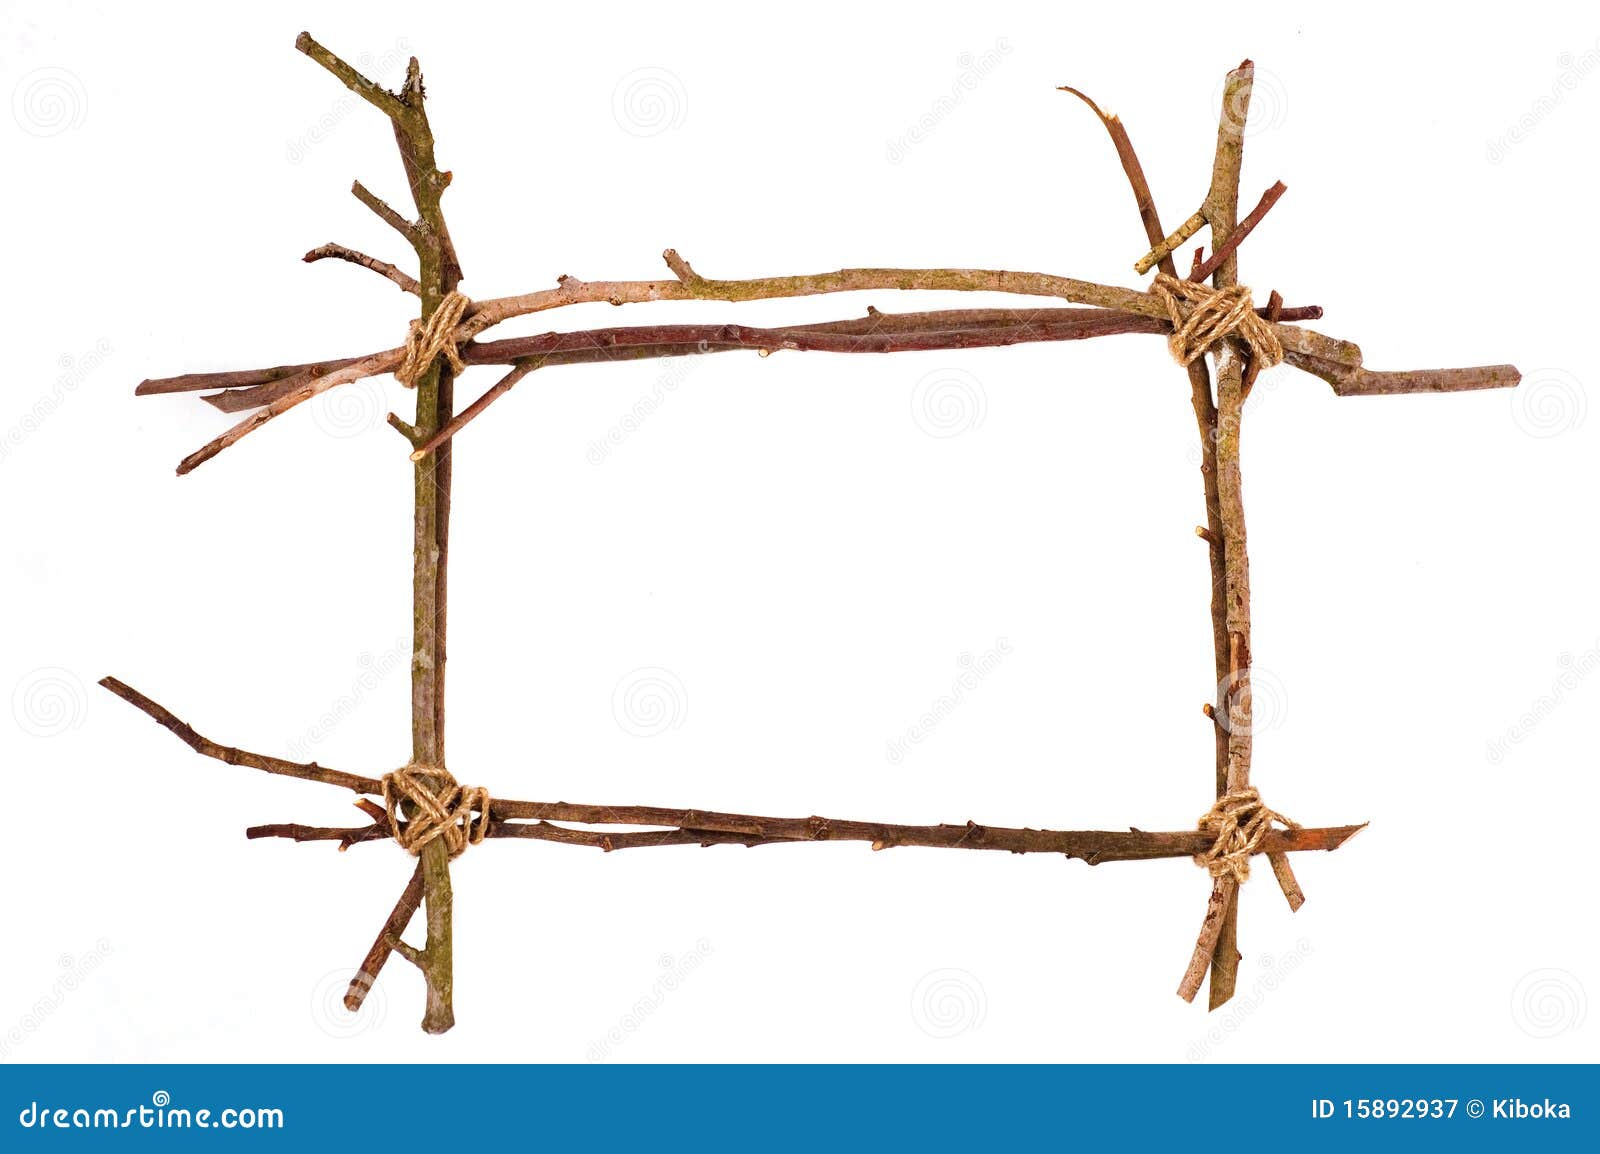 Royalty Free Stock Photography: Twig frame